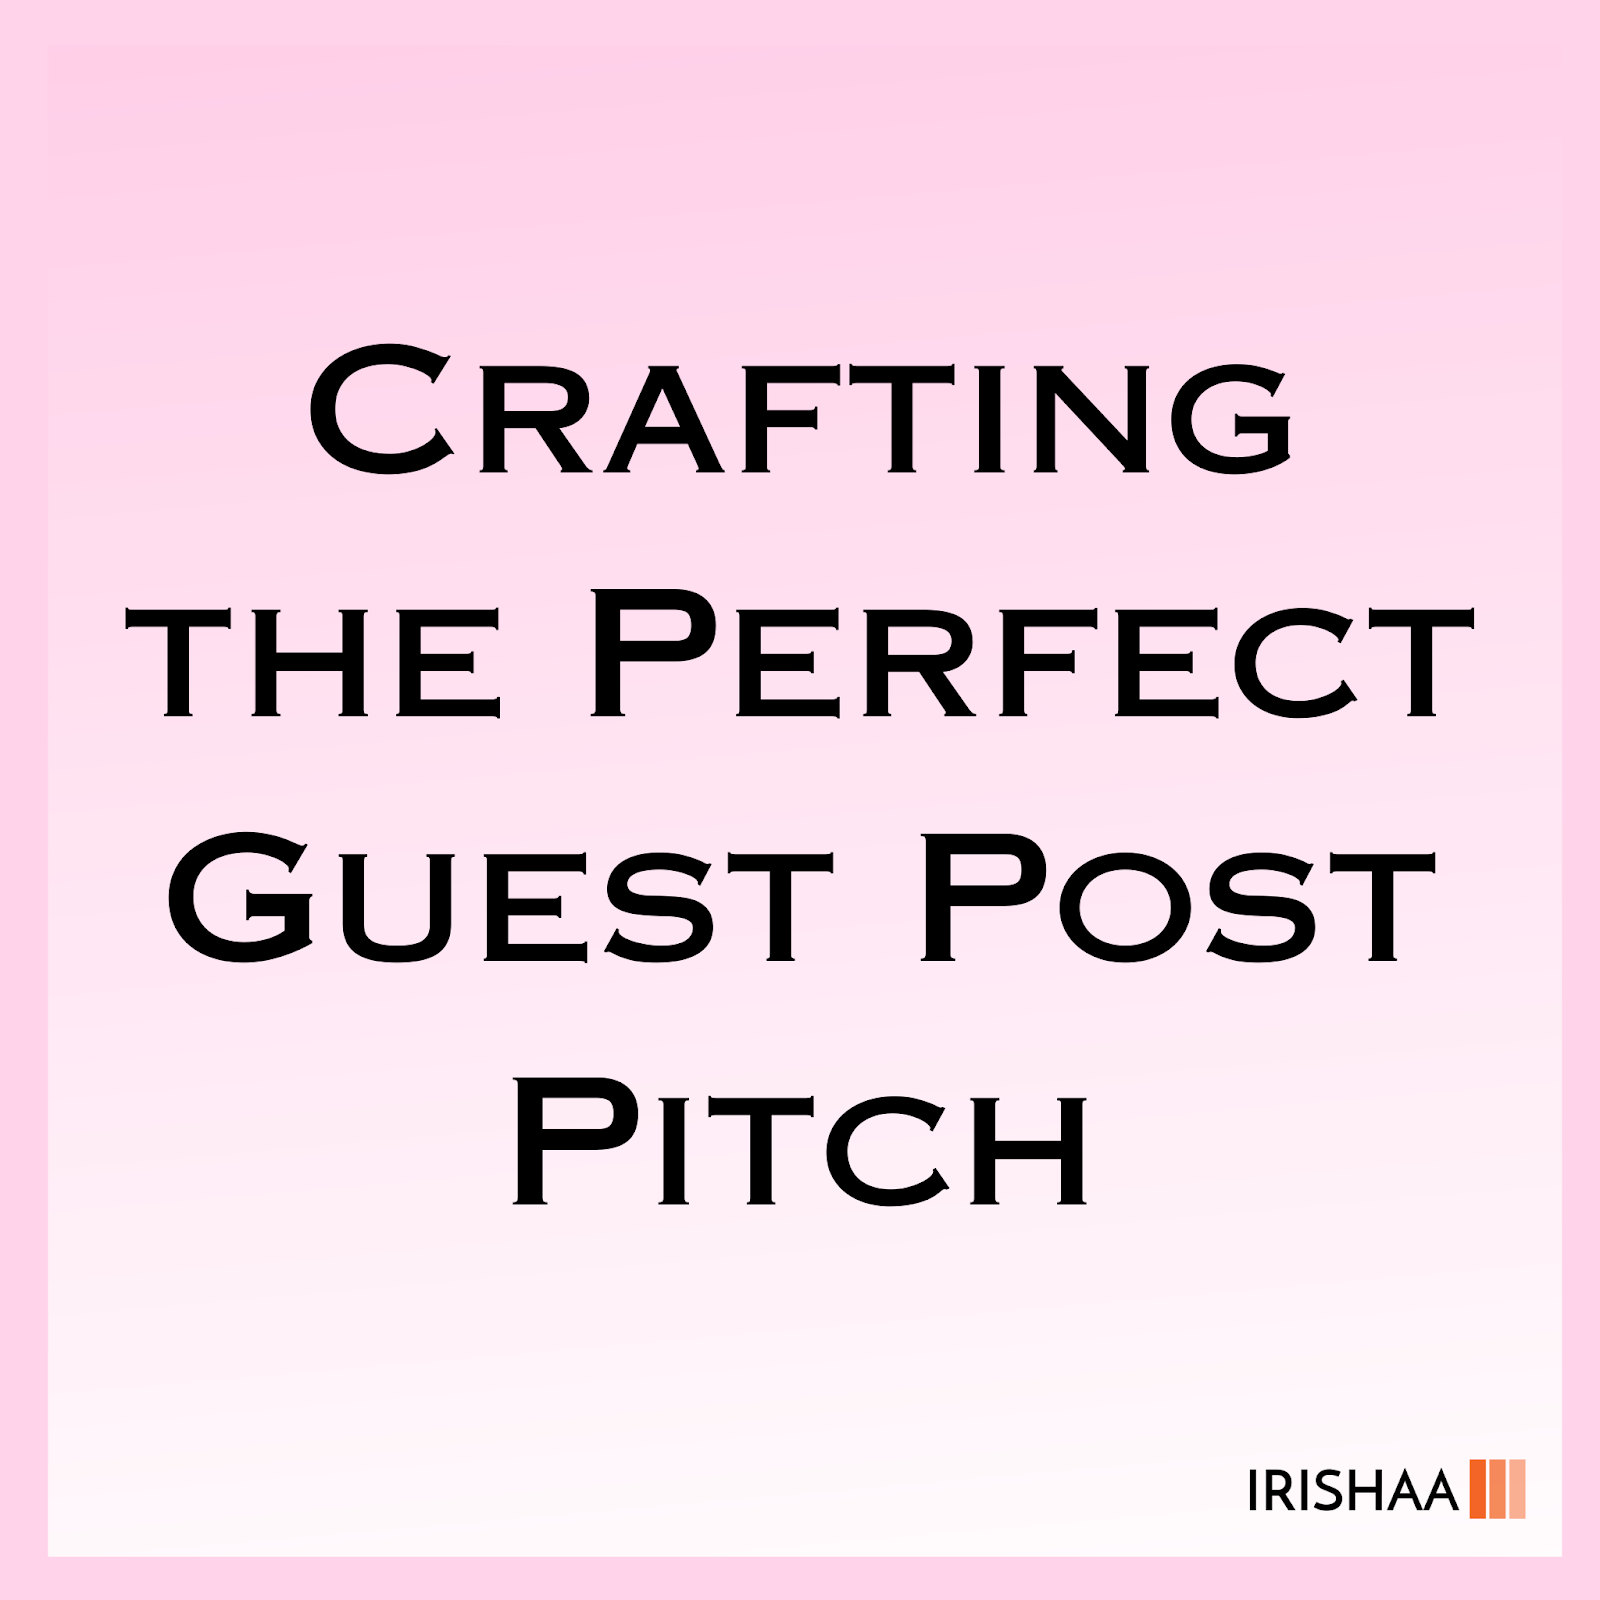 Crafting the Perfect Guest Post Pitch
